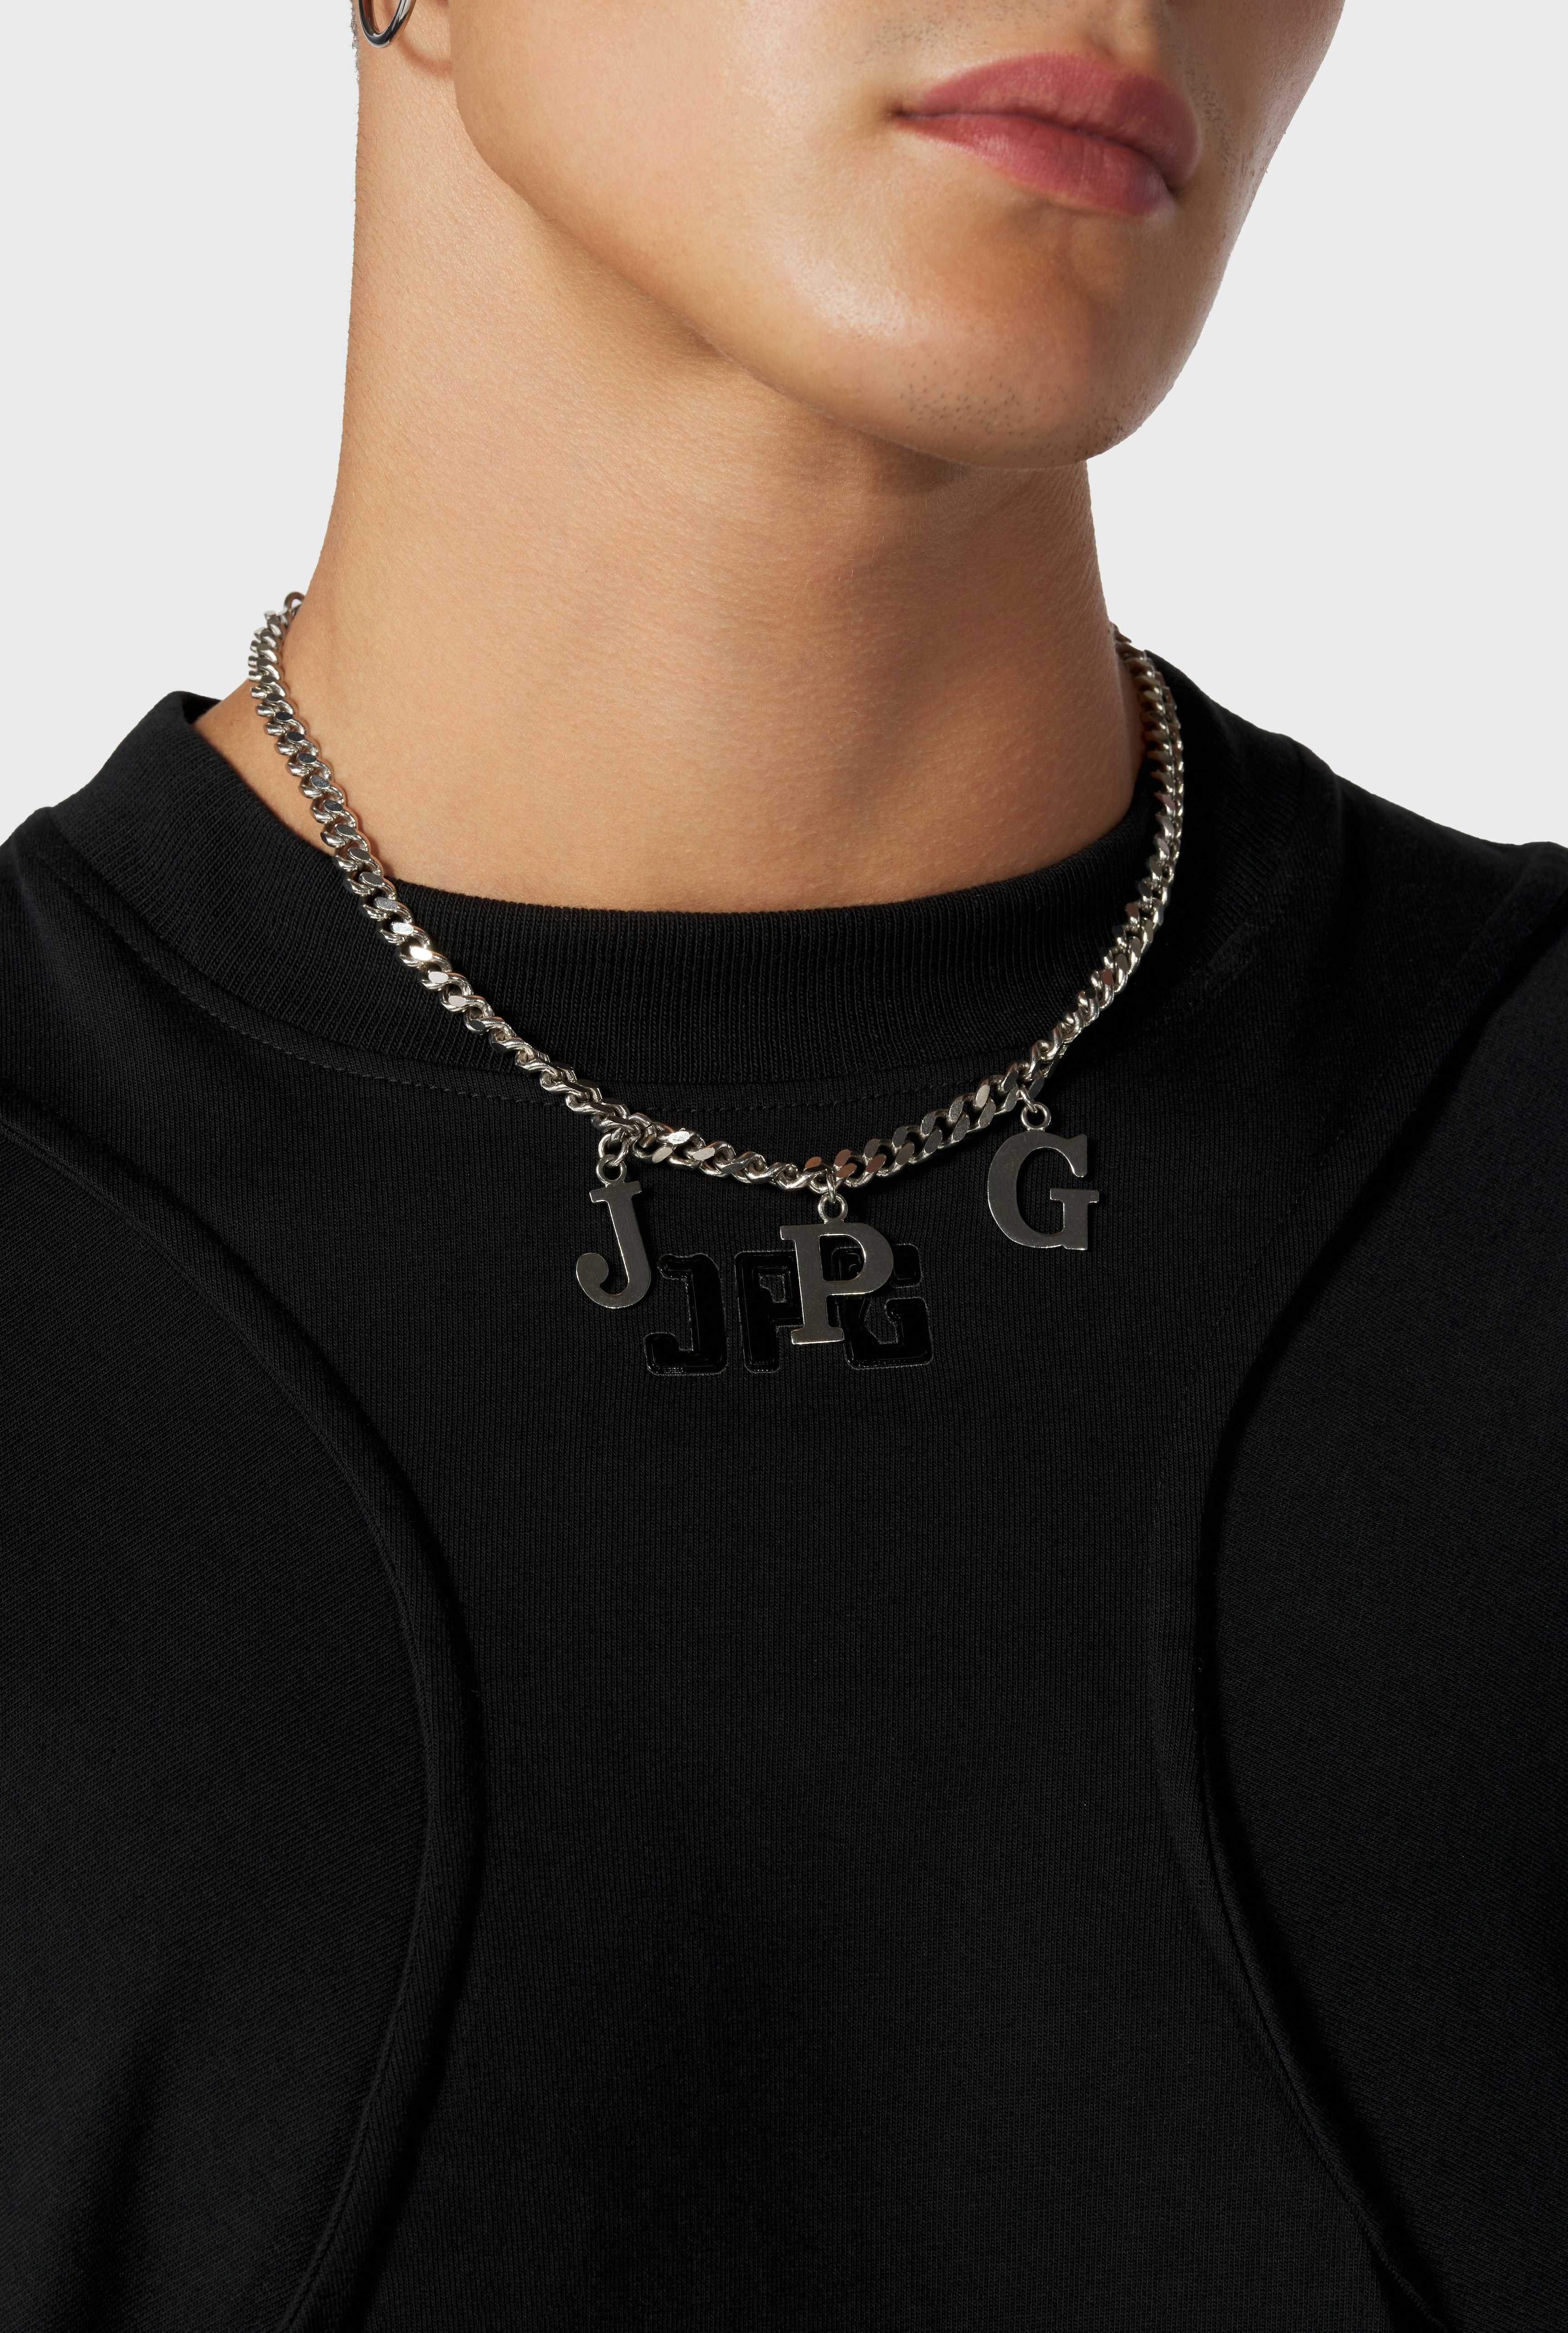 The JPG Necklace hover